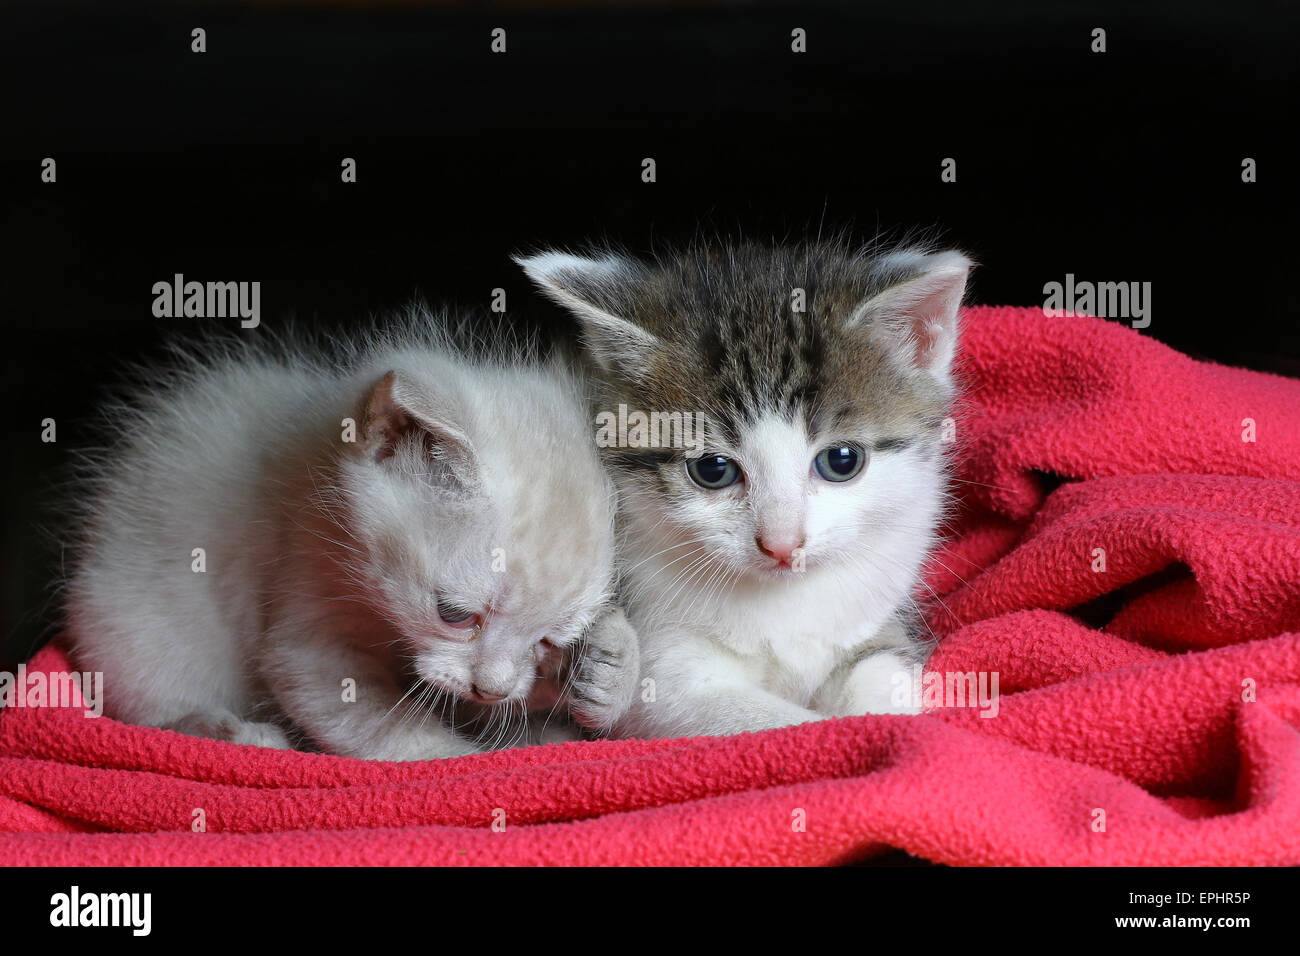 Baby cats - Two little kittens on a pink blanket with dark background Stock Photo